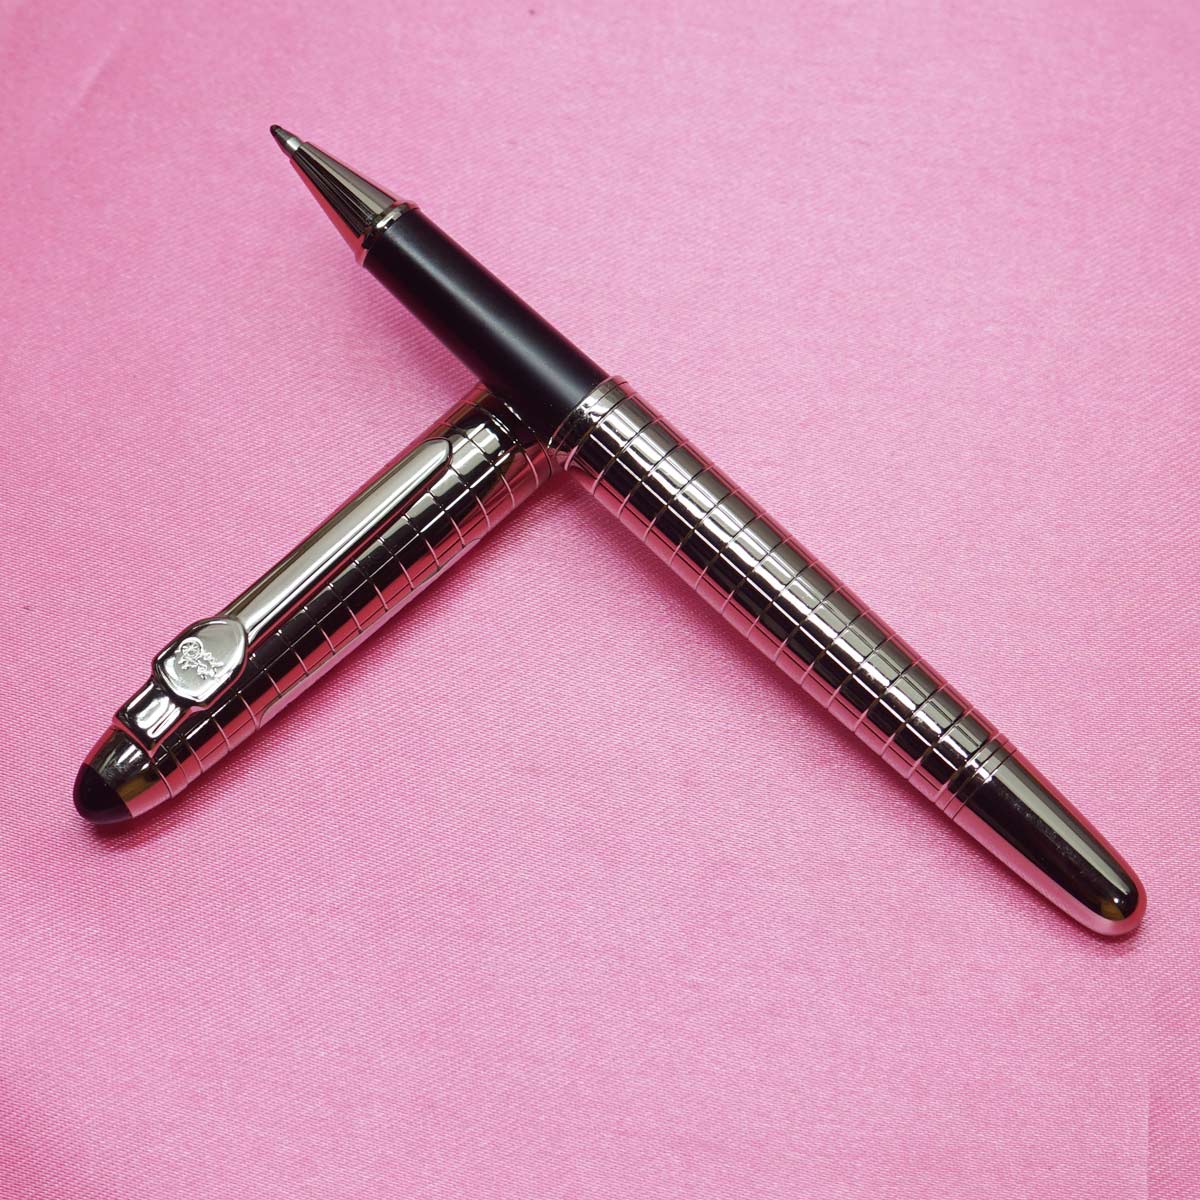 Jinhao 163 Silver Body and Cap Stripped Design on body and Cap with Silver Trims Roller Ball Pen SKU 22294